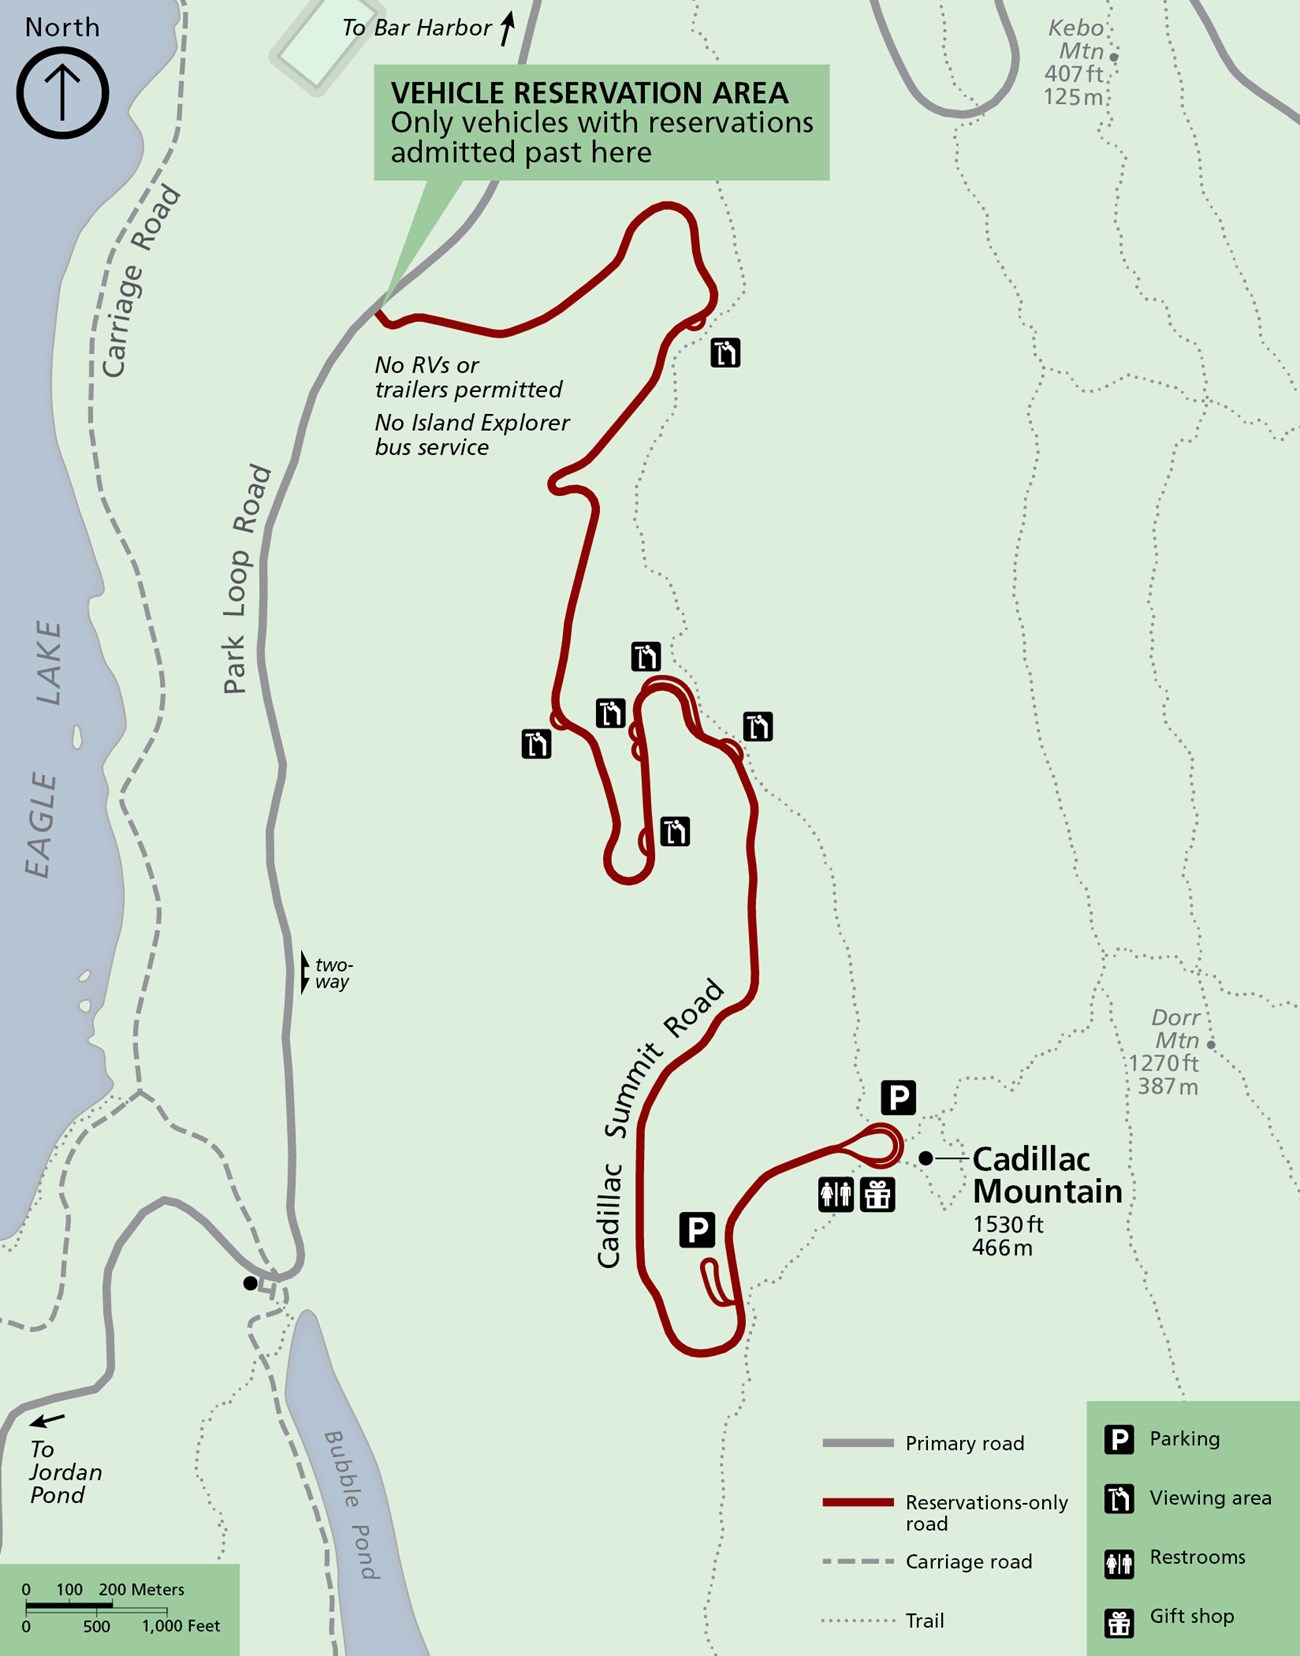 Map of 2021 Cadillac Mountain Vehicle Reservation Area